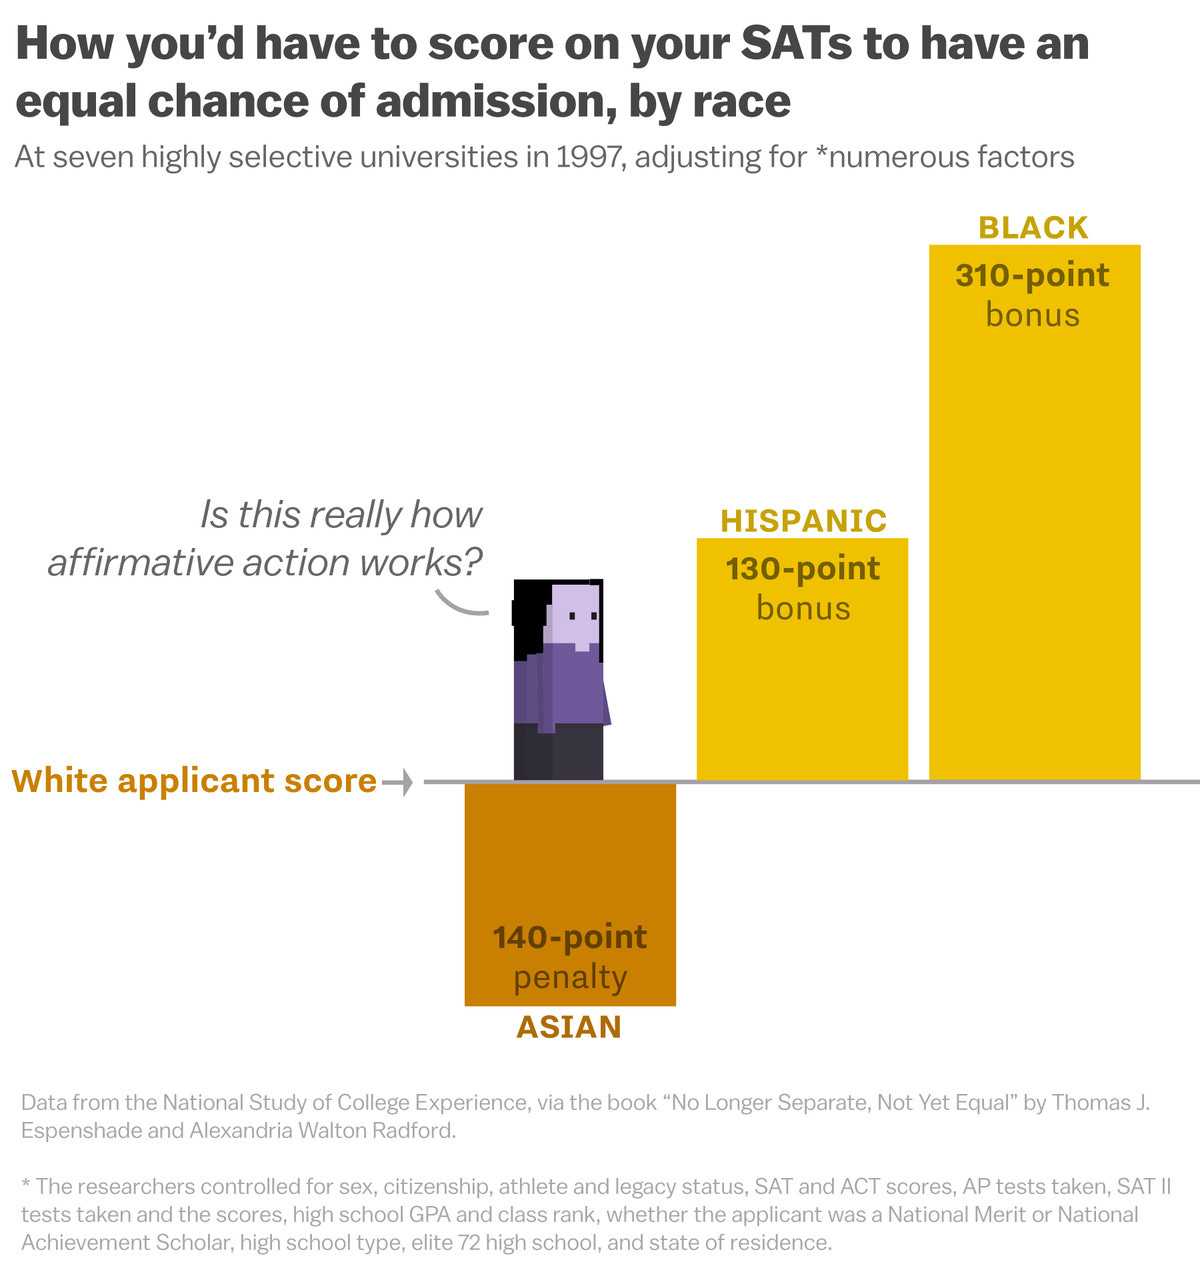 Image result from https://www.vox.com/2018/3/28/17031460/affirmative-action-asian-discrimination-admissions